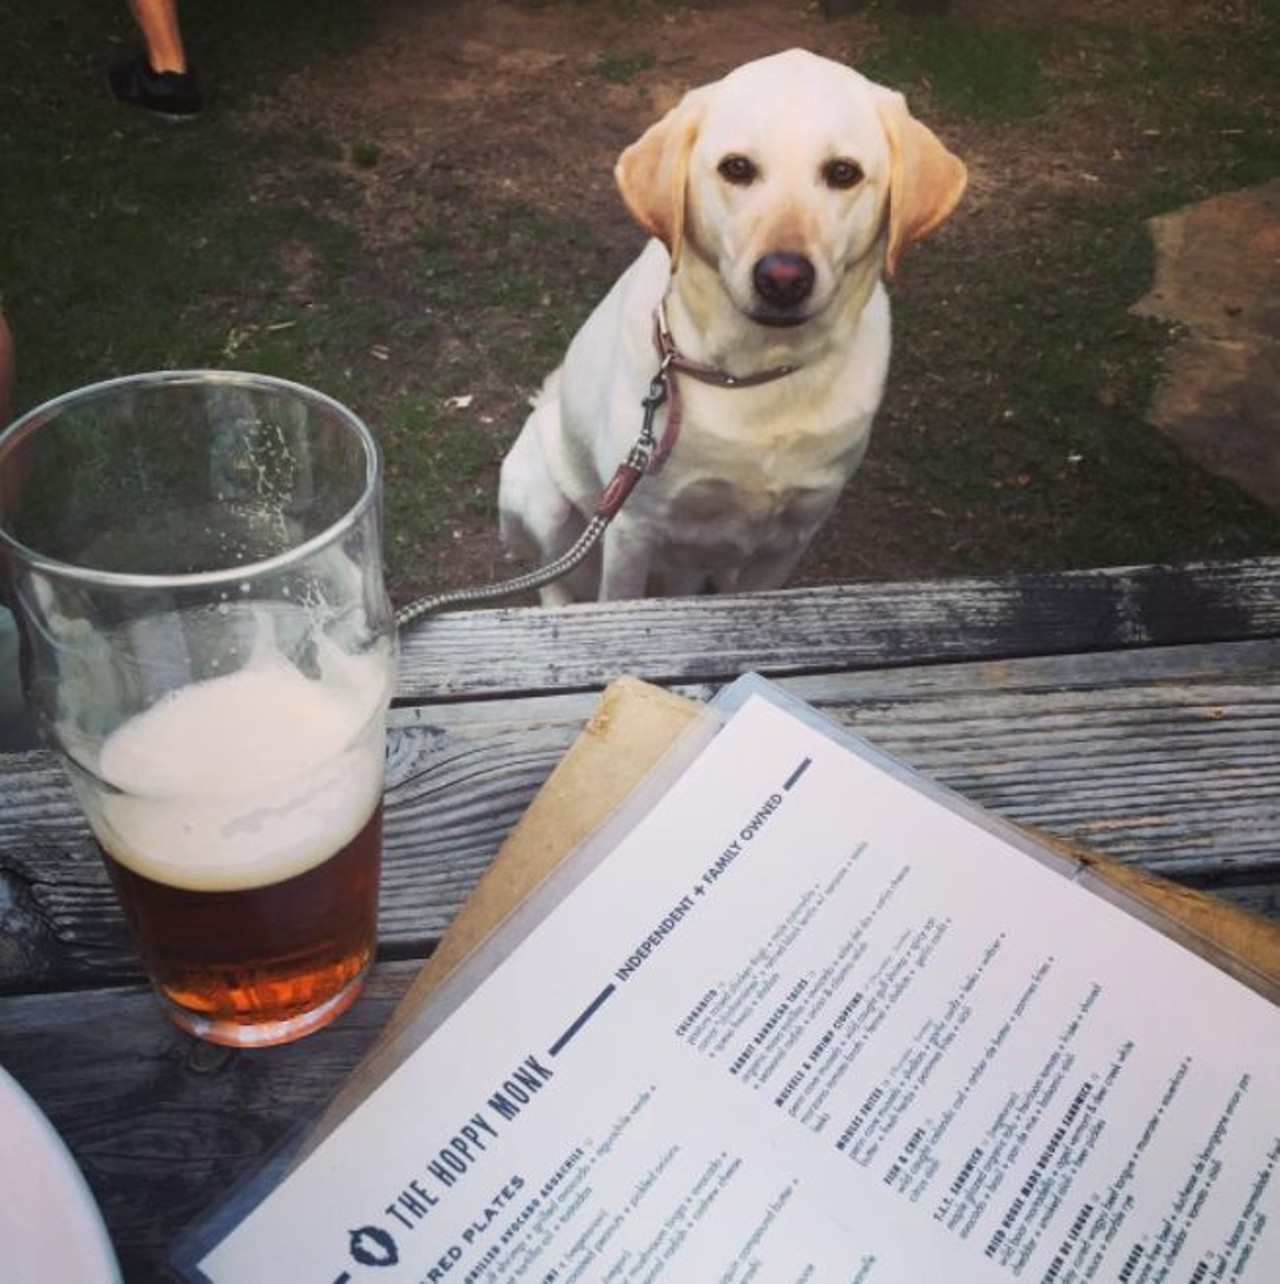 The Hoppy Monk  
1010 N. Loop 1604 E., (210) 545-3330
Whether you&#146;re going to the Hoppy Monk to grab a drink or to check out all of the pups that are typically there, you&#146;re sure to have a great night. 
Photo via Instagram,
ggheinrd
